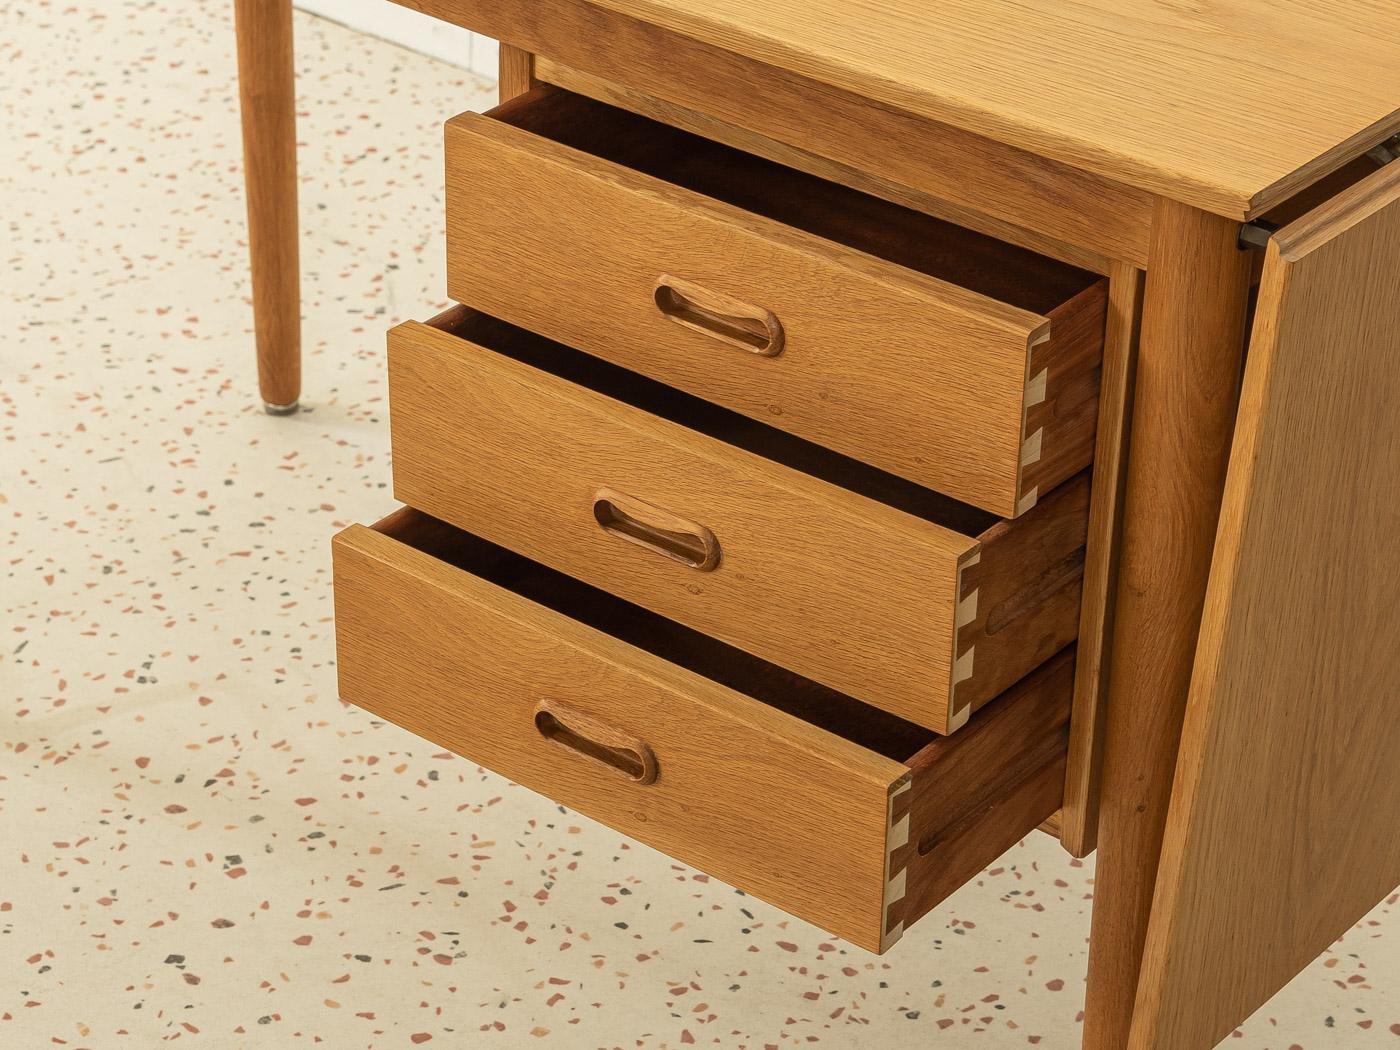 Mid-20th Century Freestanding Desk from the 1960s by Arne Vodder for H. Sigh, Made in Denmark